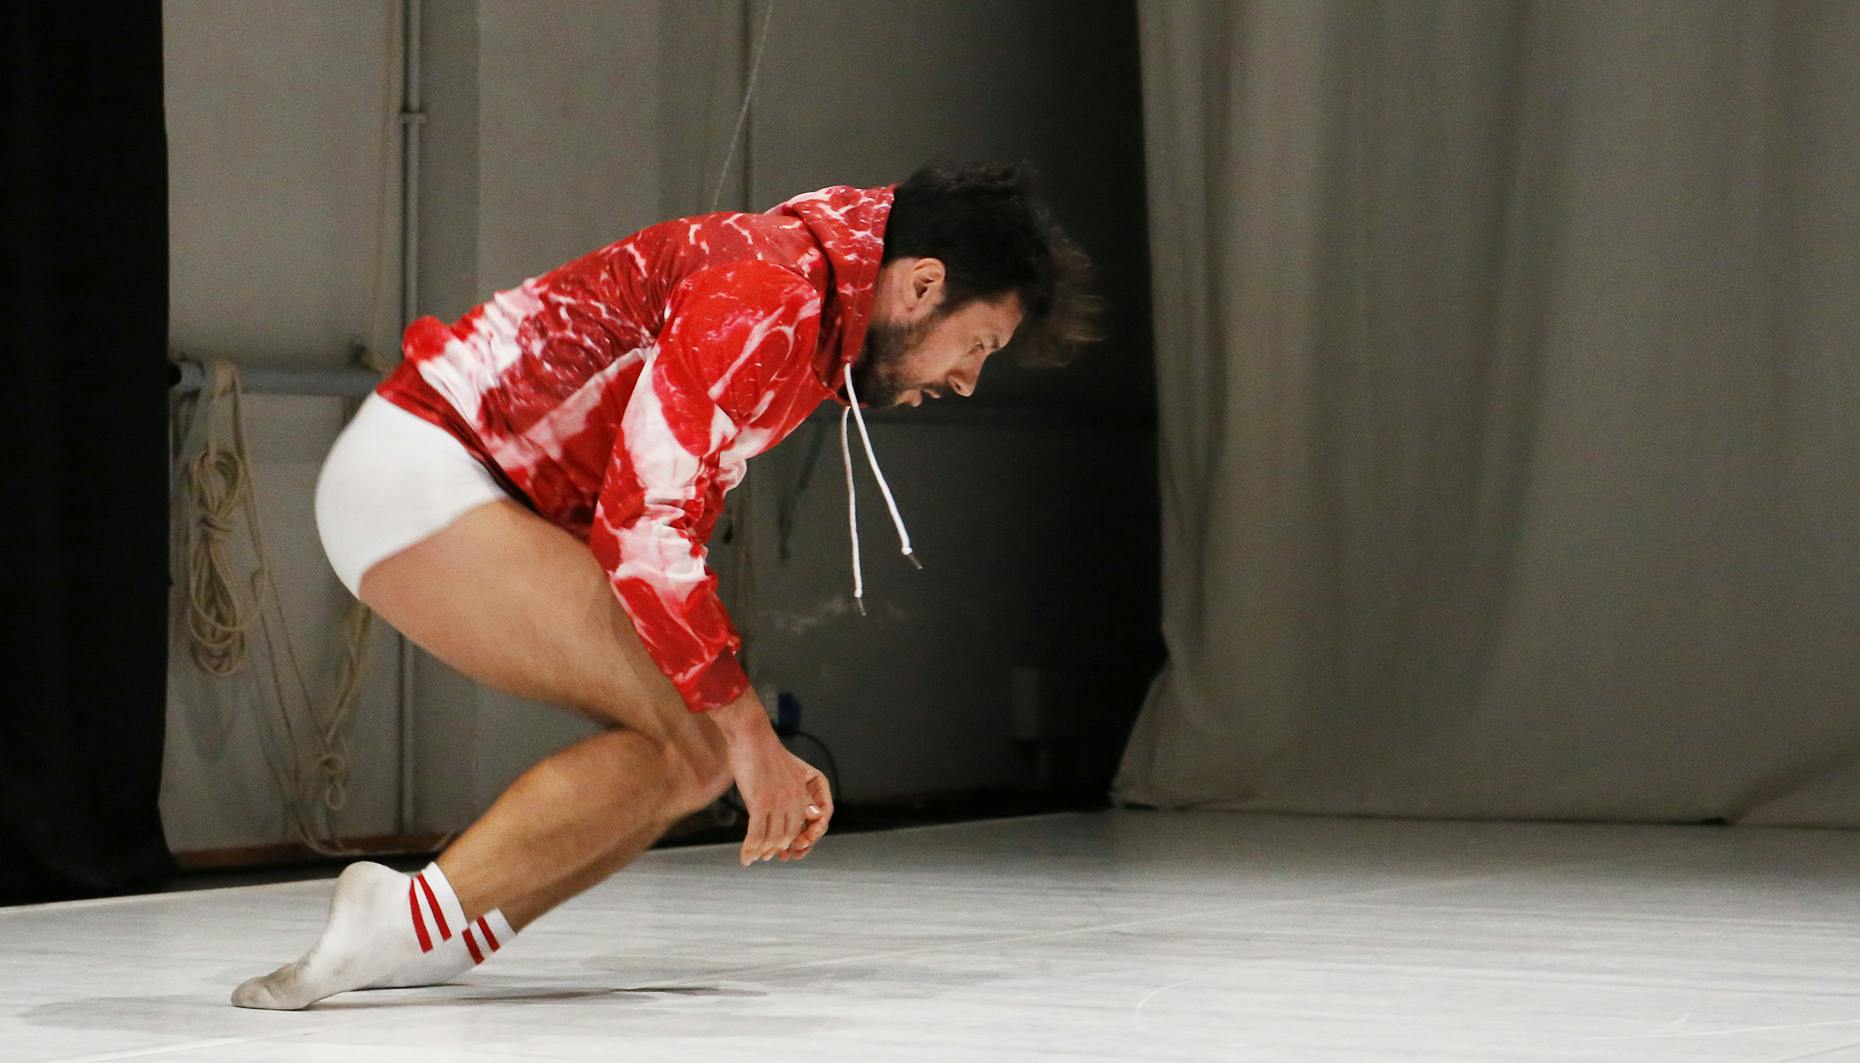 Carlo Massari wears a red and white sweatshirt and balances on the back of his feet 